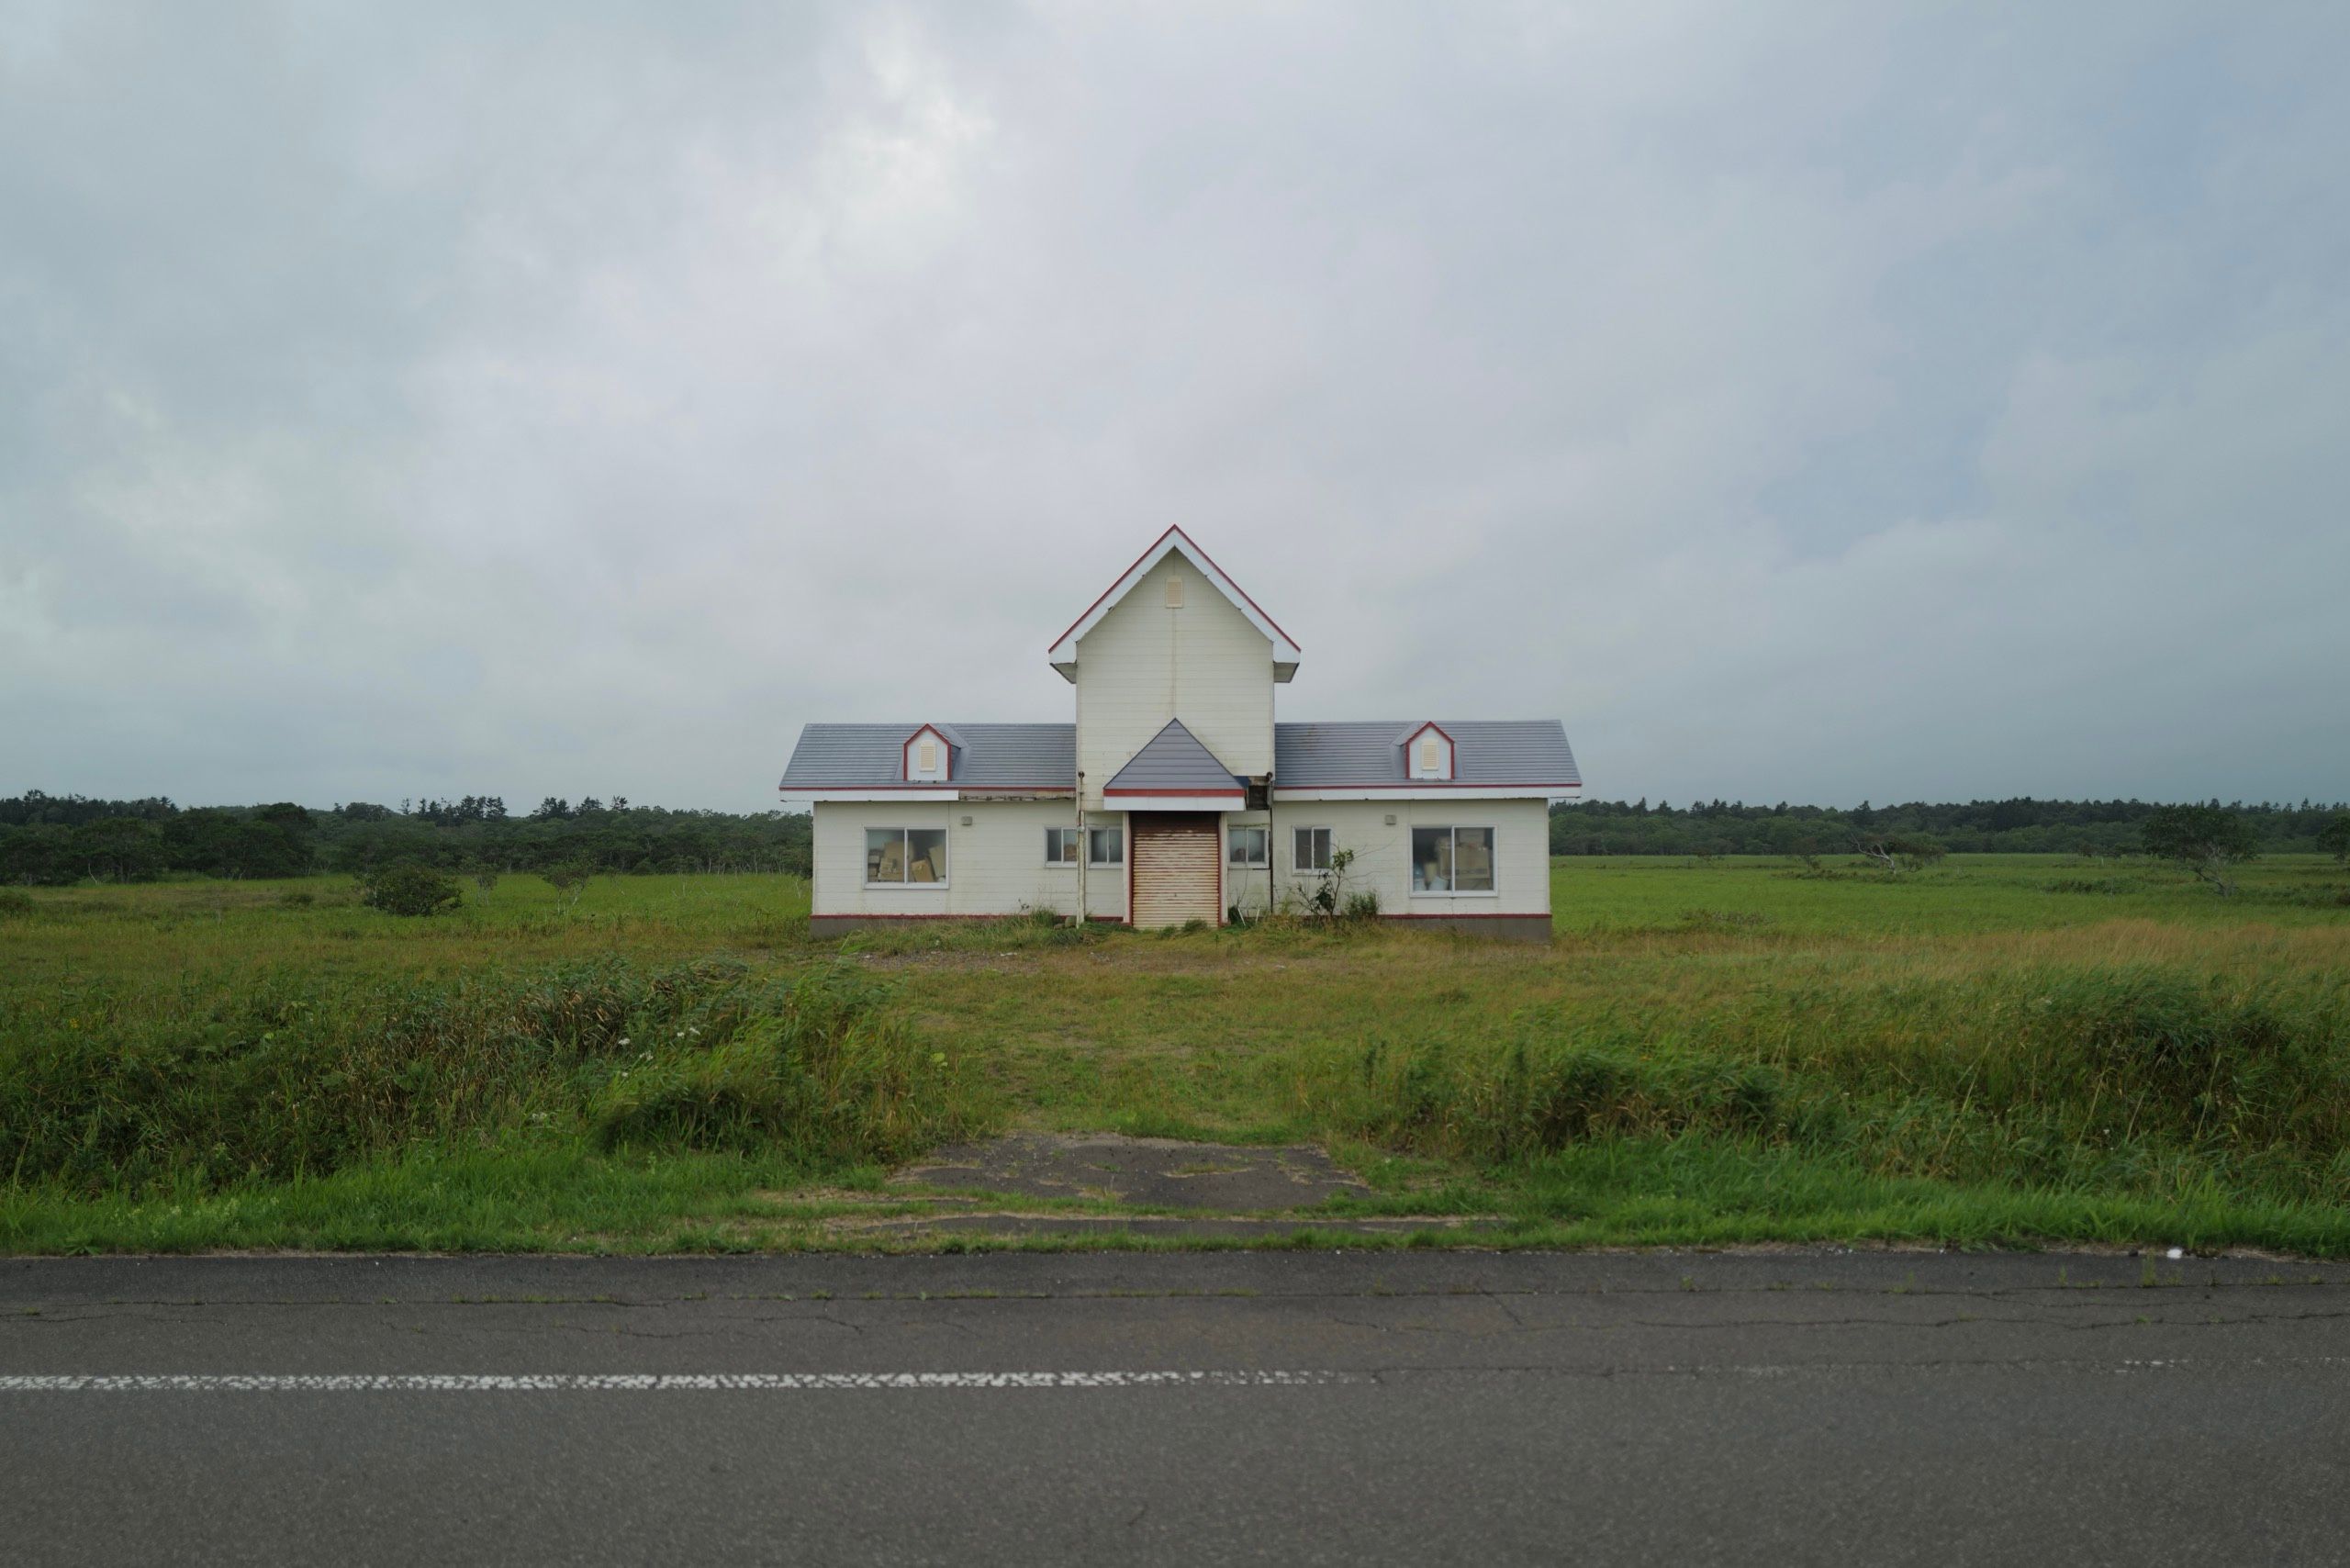 A European-looking abandoned buildings stands in a field off the road.